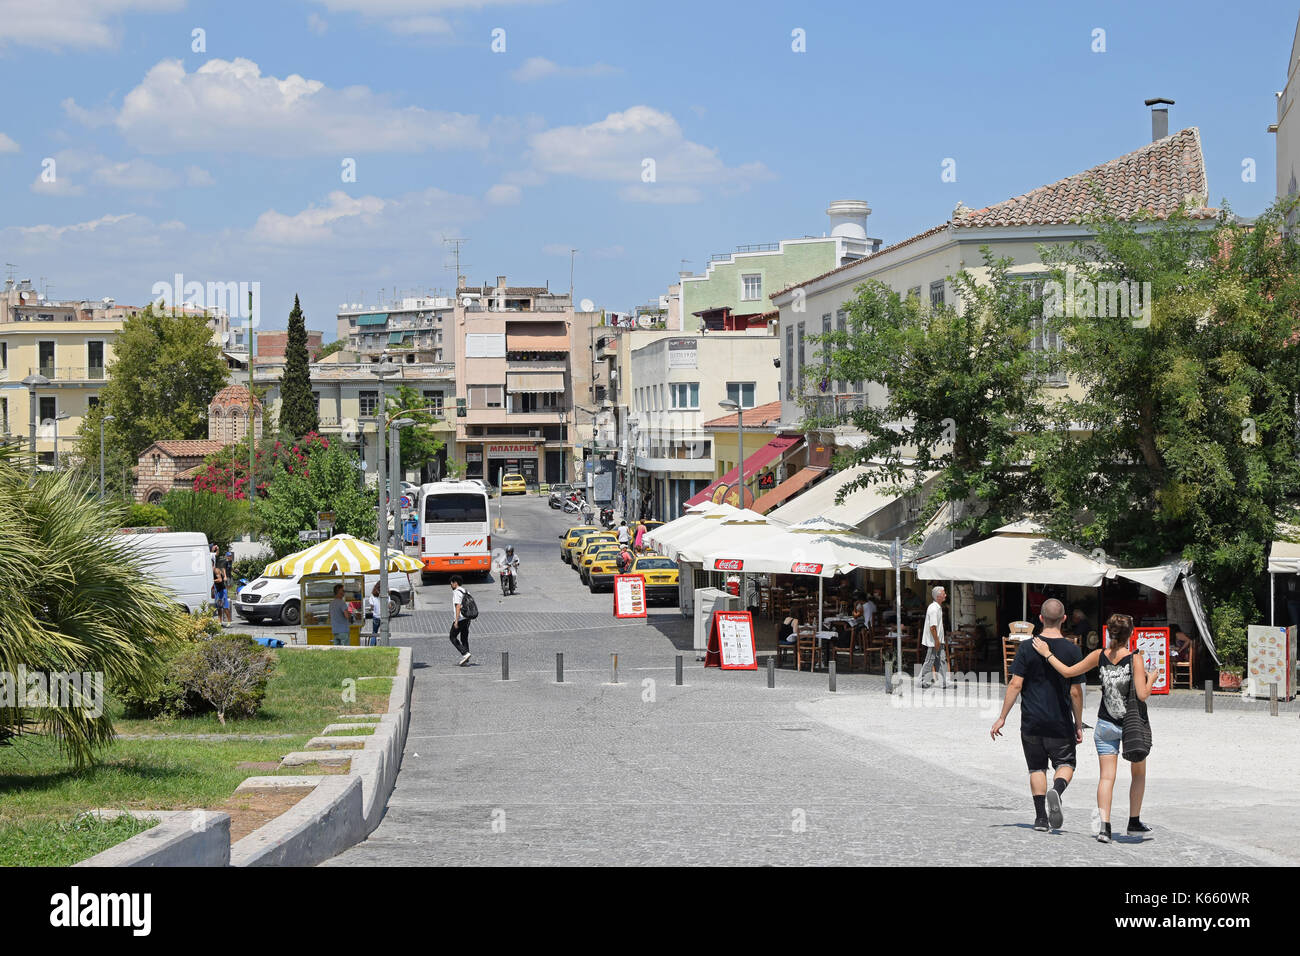 ATHENS, GREECE - AUGUST 4, 2016: People on a hot summer day in the city of Athens, Greece. Stock Photo